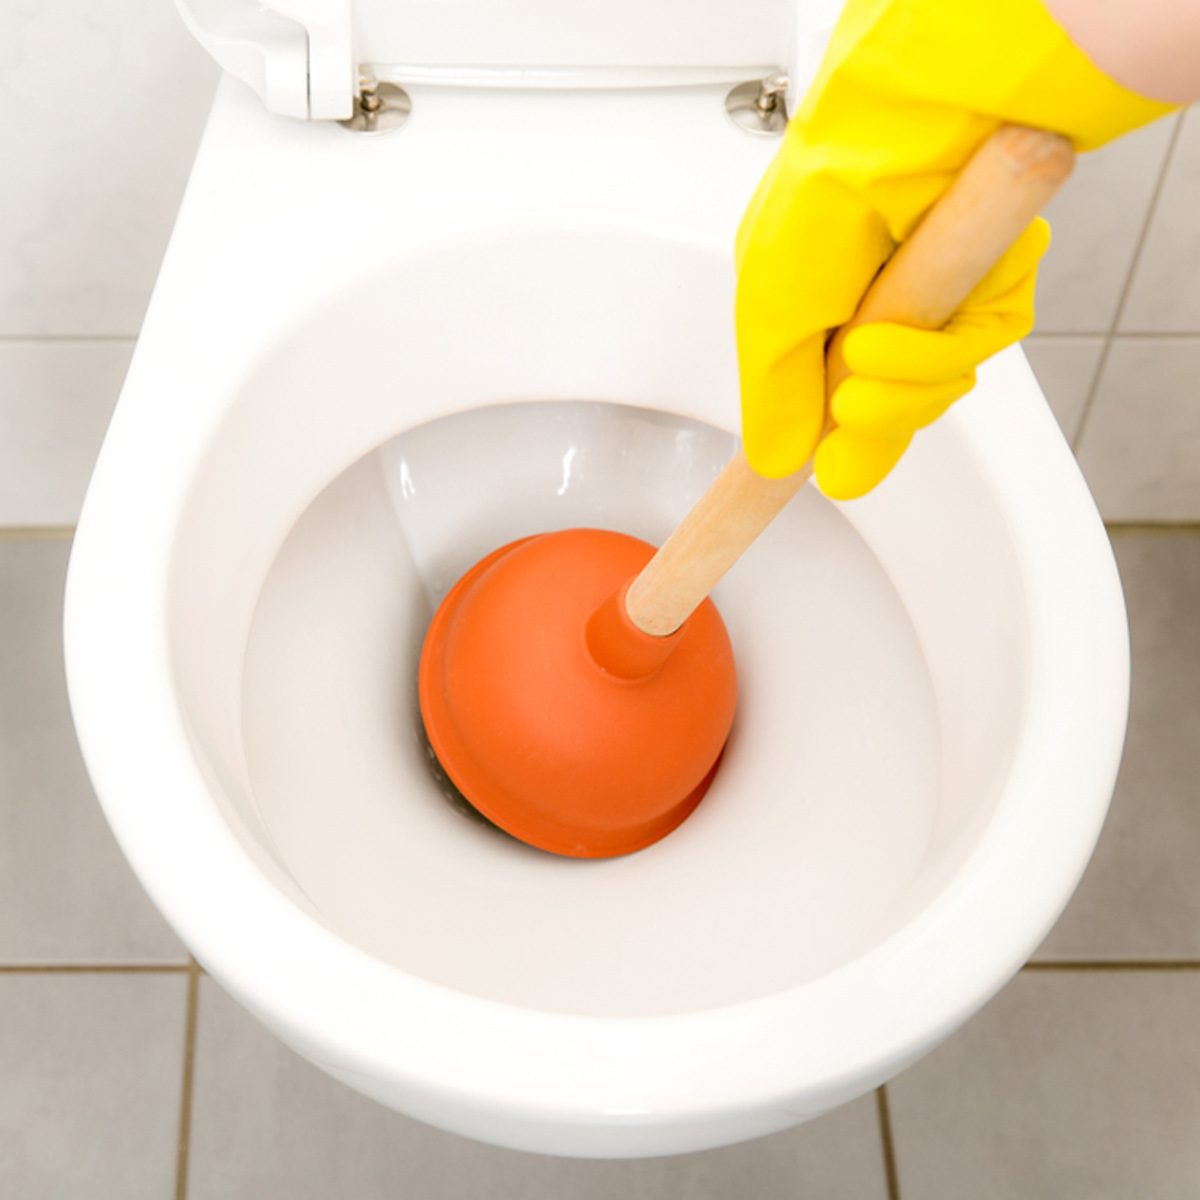 How to unclog blocked toilet after 3 months and trying everything